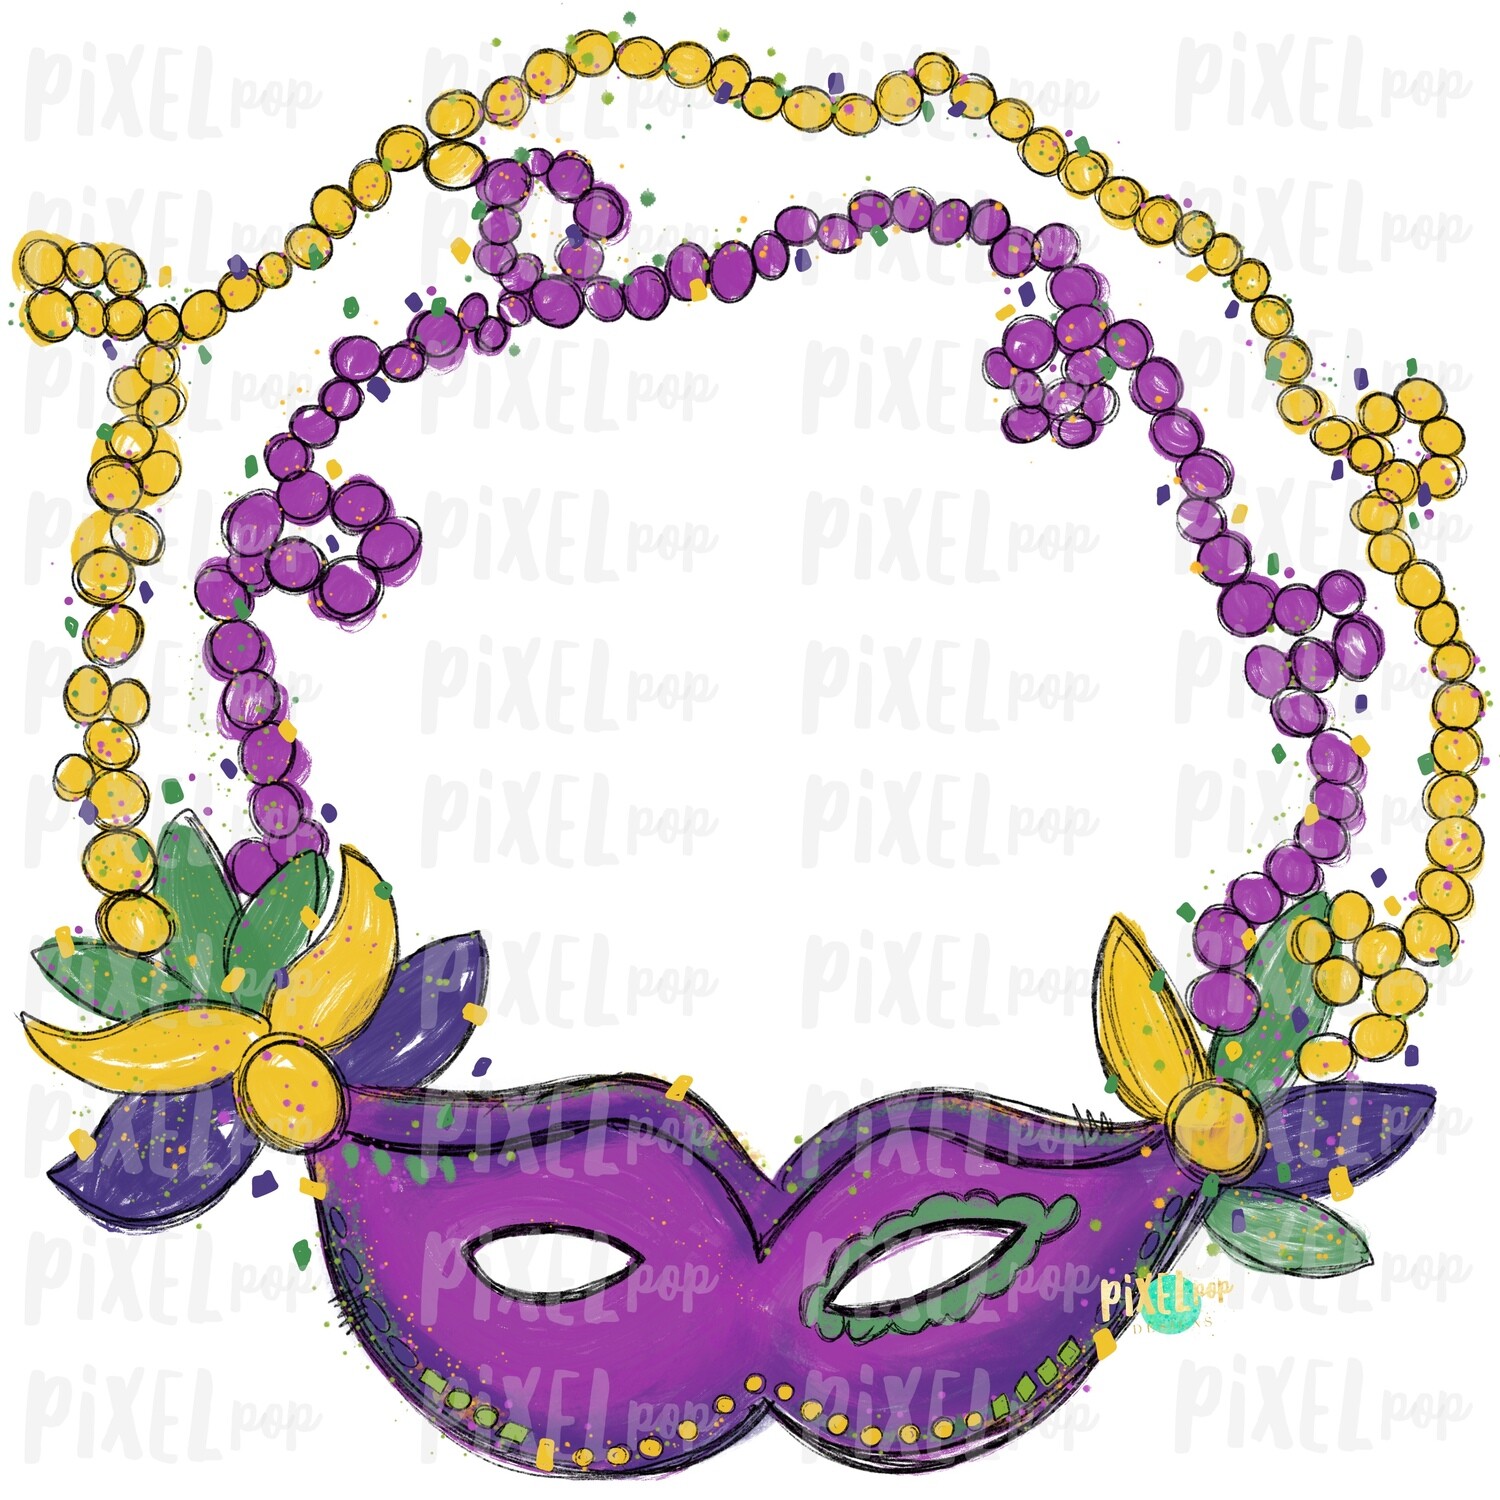 Mardi Gras Mask and Beads Blank Sublimation PNG | New Orleans Art | Hand Painted Design | Mardi Gras Design | Digital Download | Clip Art